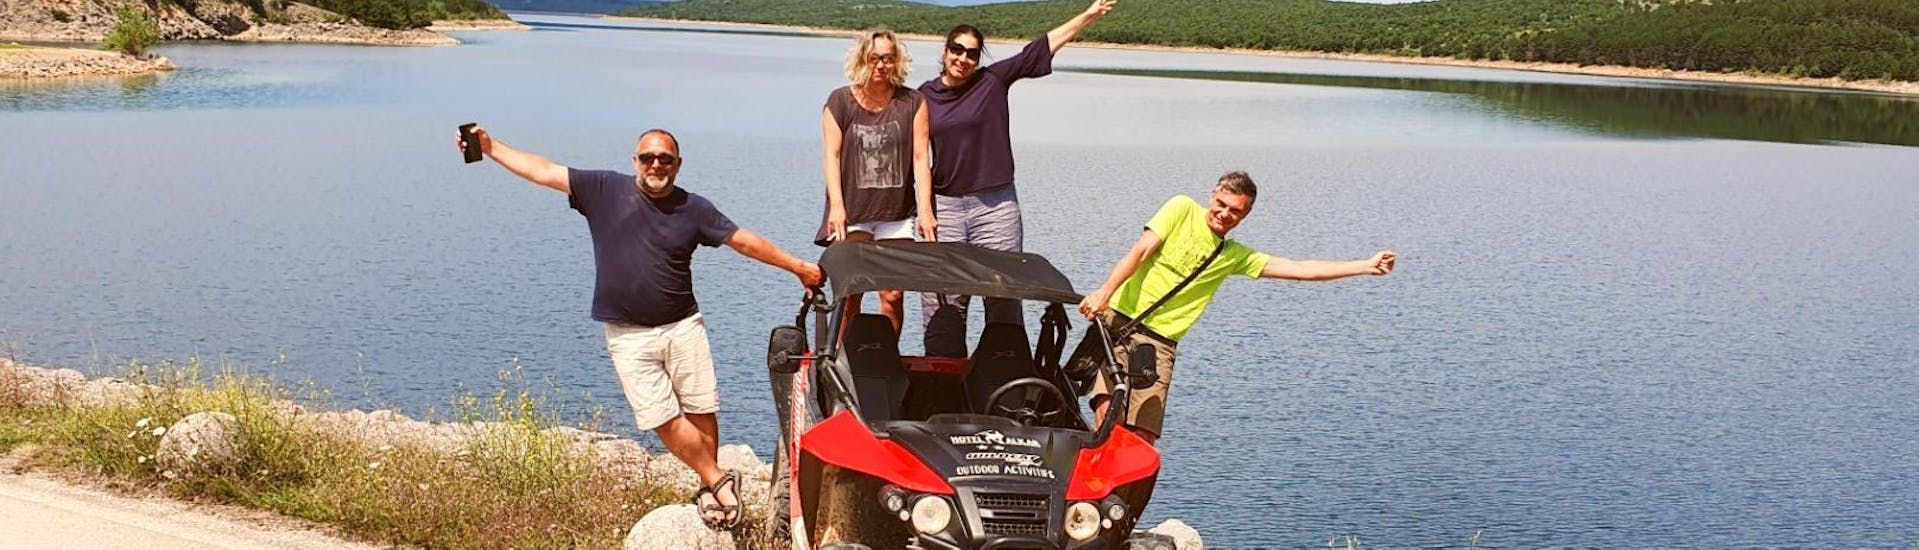 Happy participants of the Fun Buggy Tour from Sinj are posing for a photo taken by a local guide from Hotel Alkar.